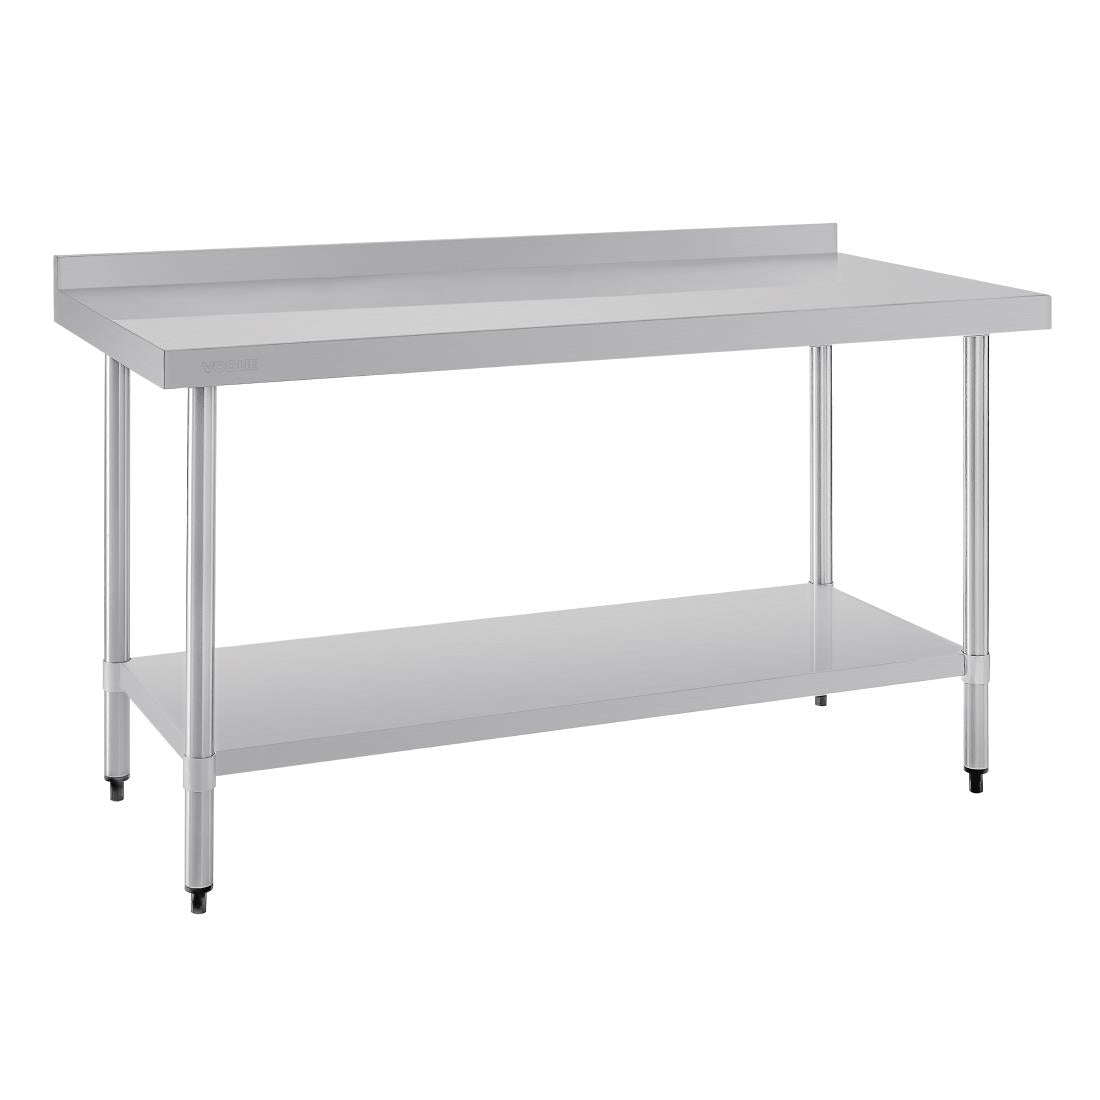 Vogue Stainless Steel Prep Table with Upstand 1500mm